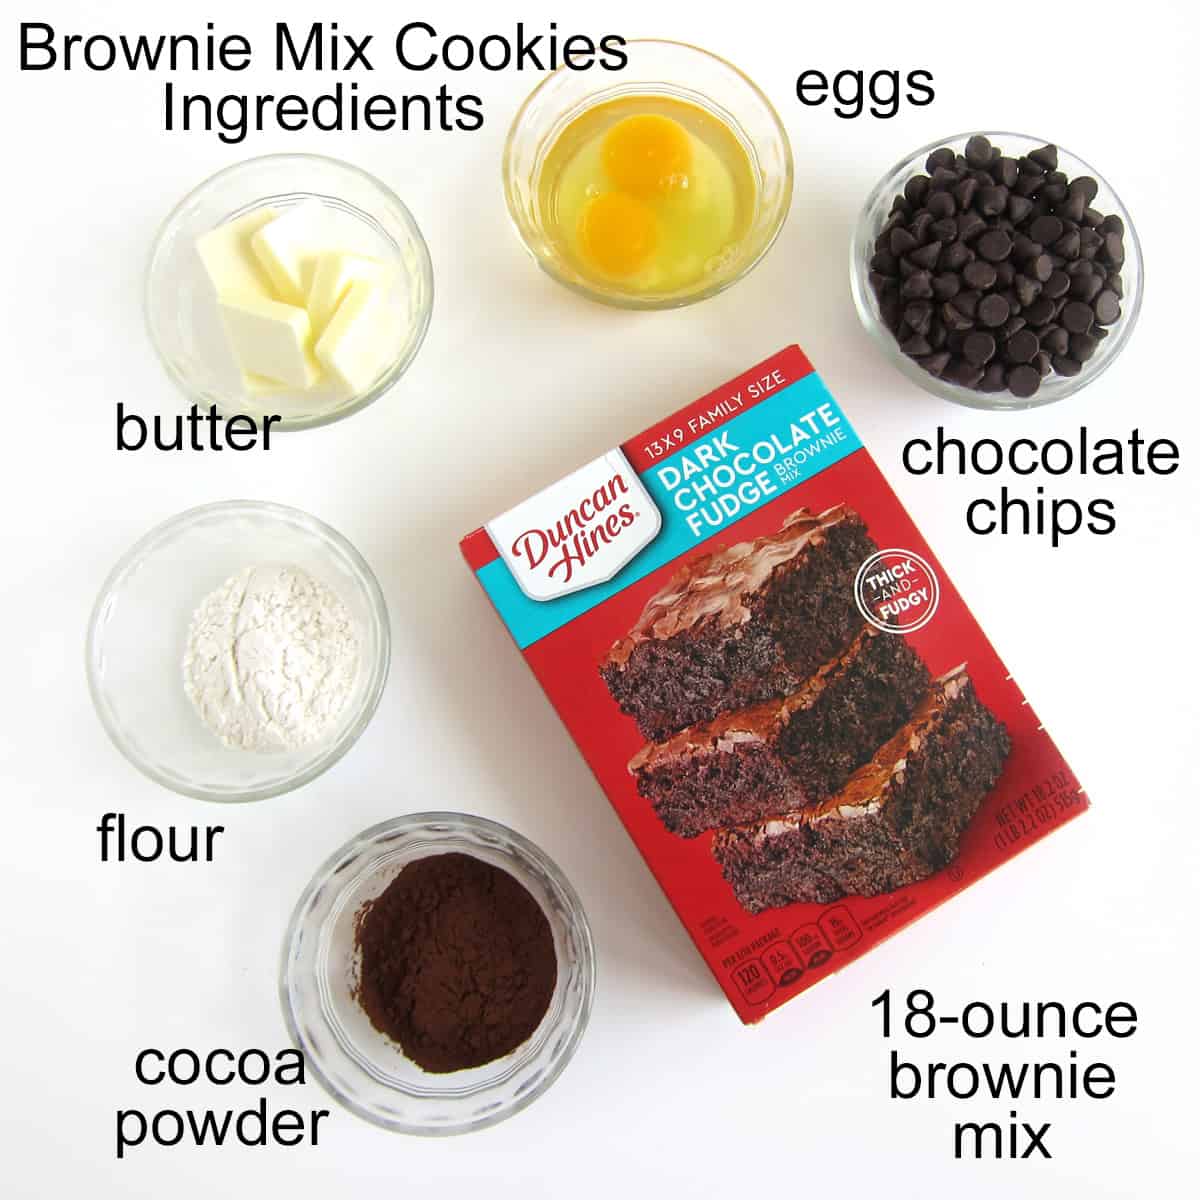 Brownie Mix Cookie Ingredients including brownie mix, cocoa powder, flour, butter eggs, and chocolate chips.